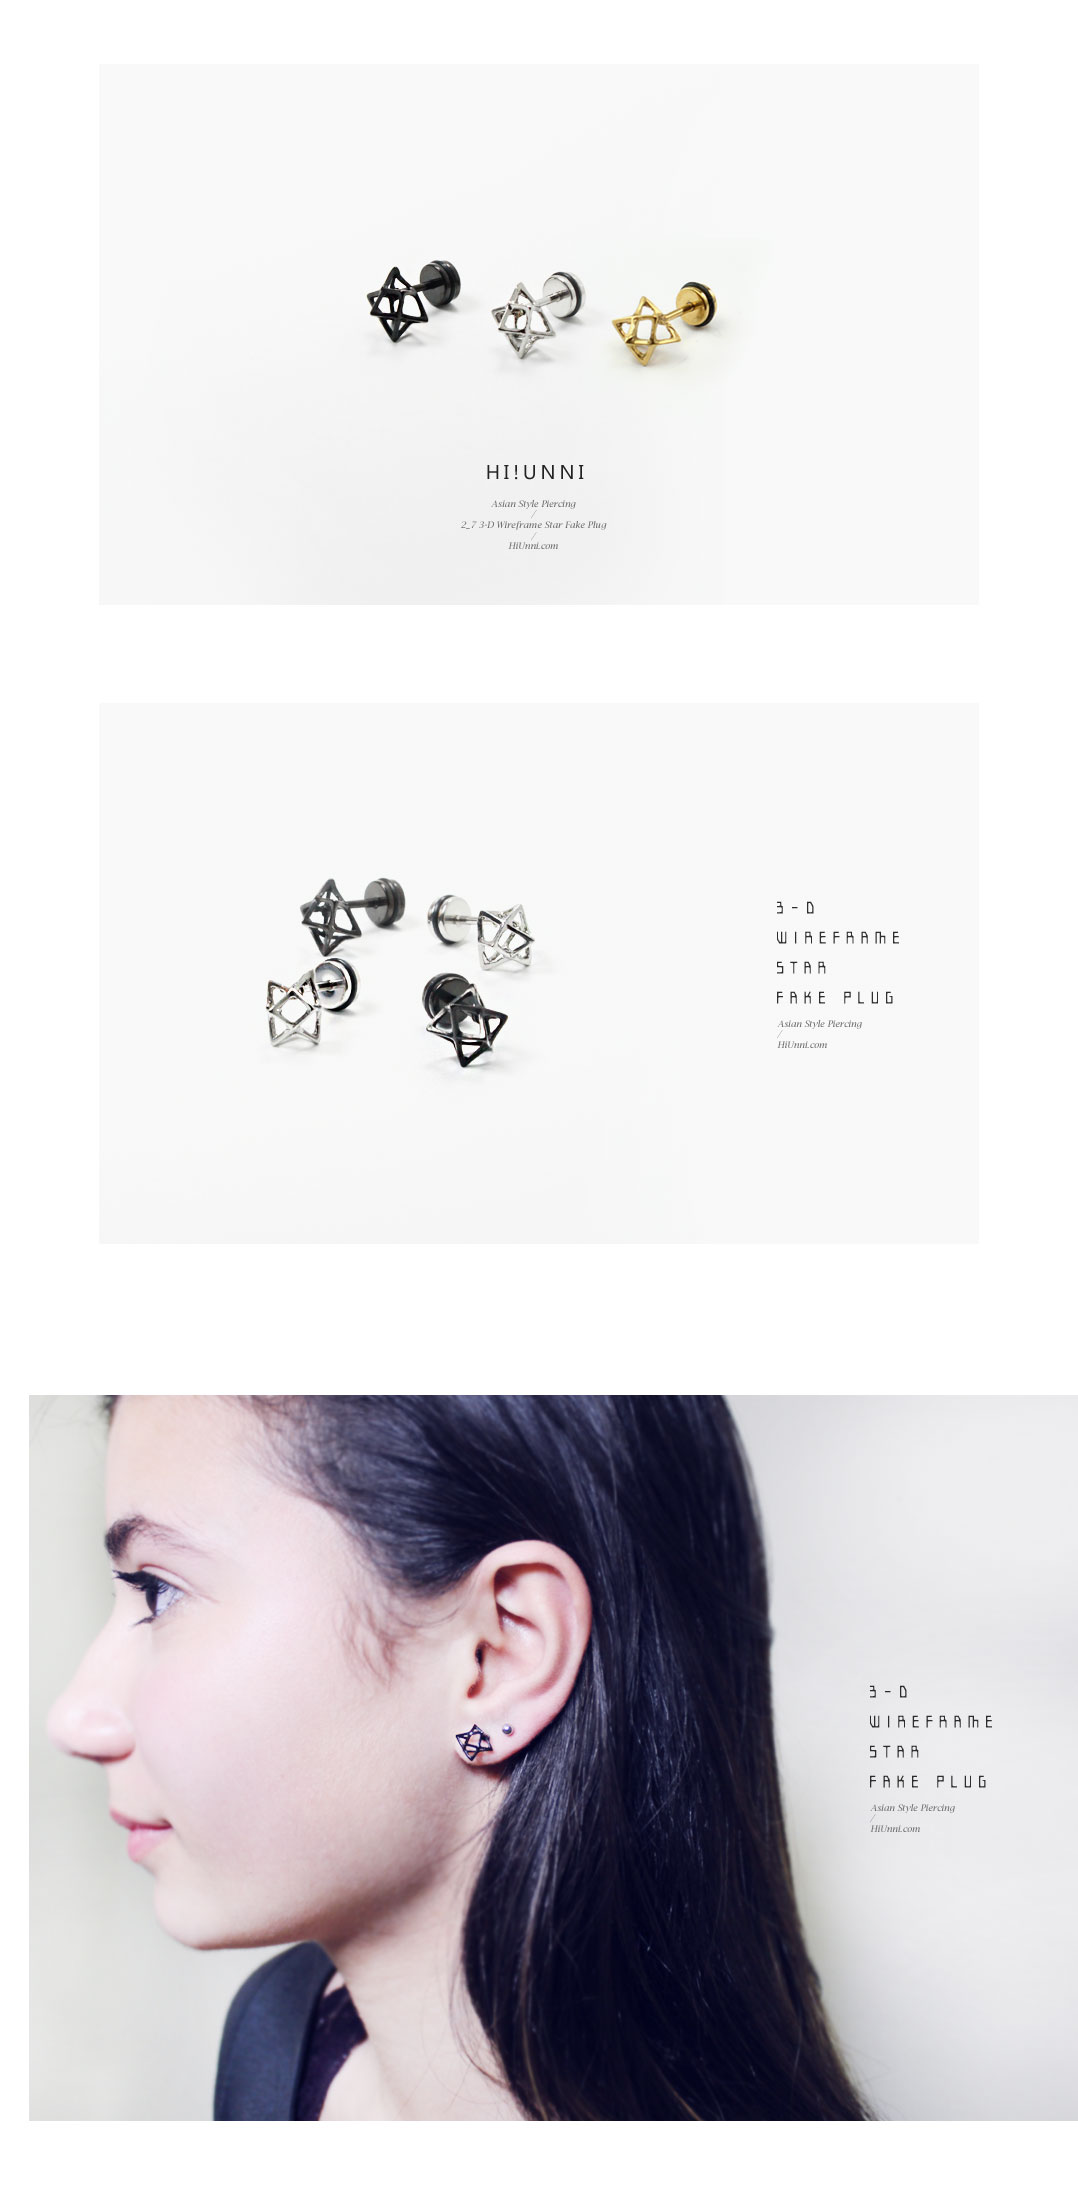 ear_studs_piercing_Cartilage_earrings_16g_316l_korean_asian_style_barbell_cheaters_fake_plug_3d_Wireframe_Star